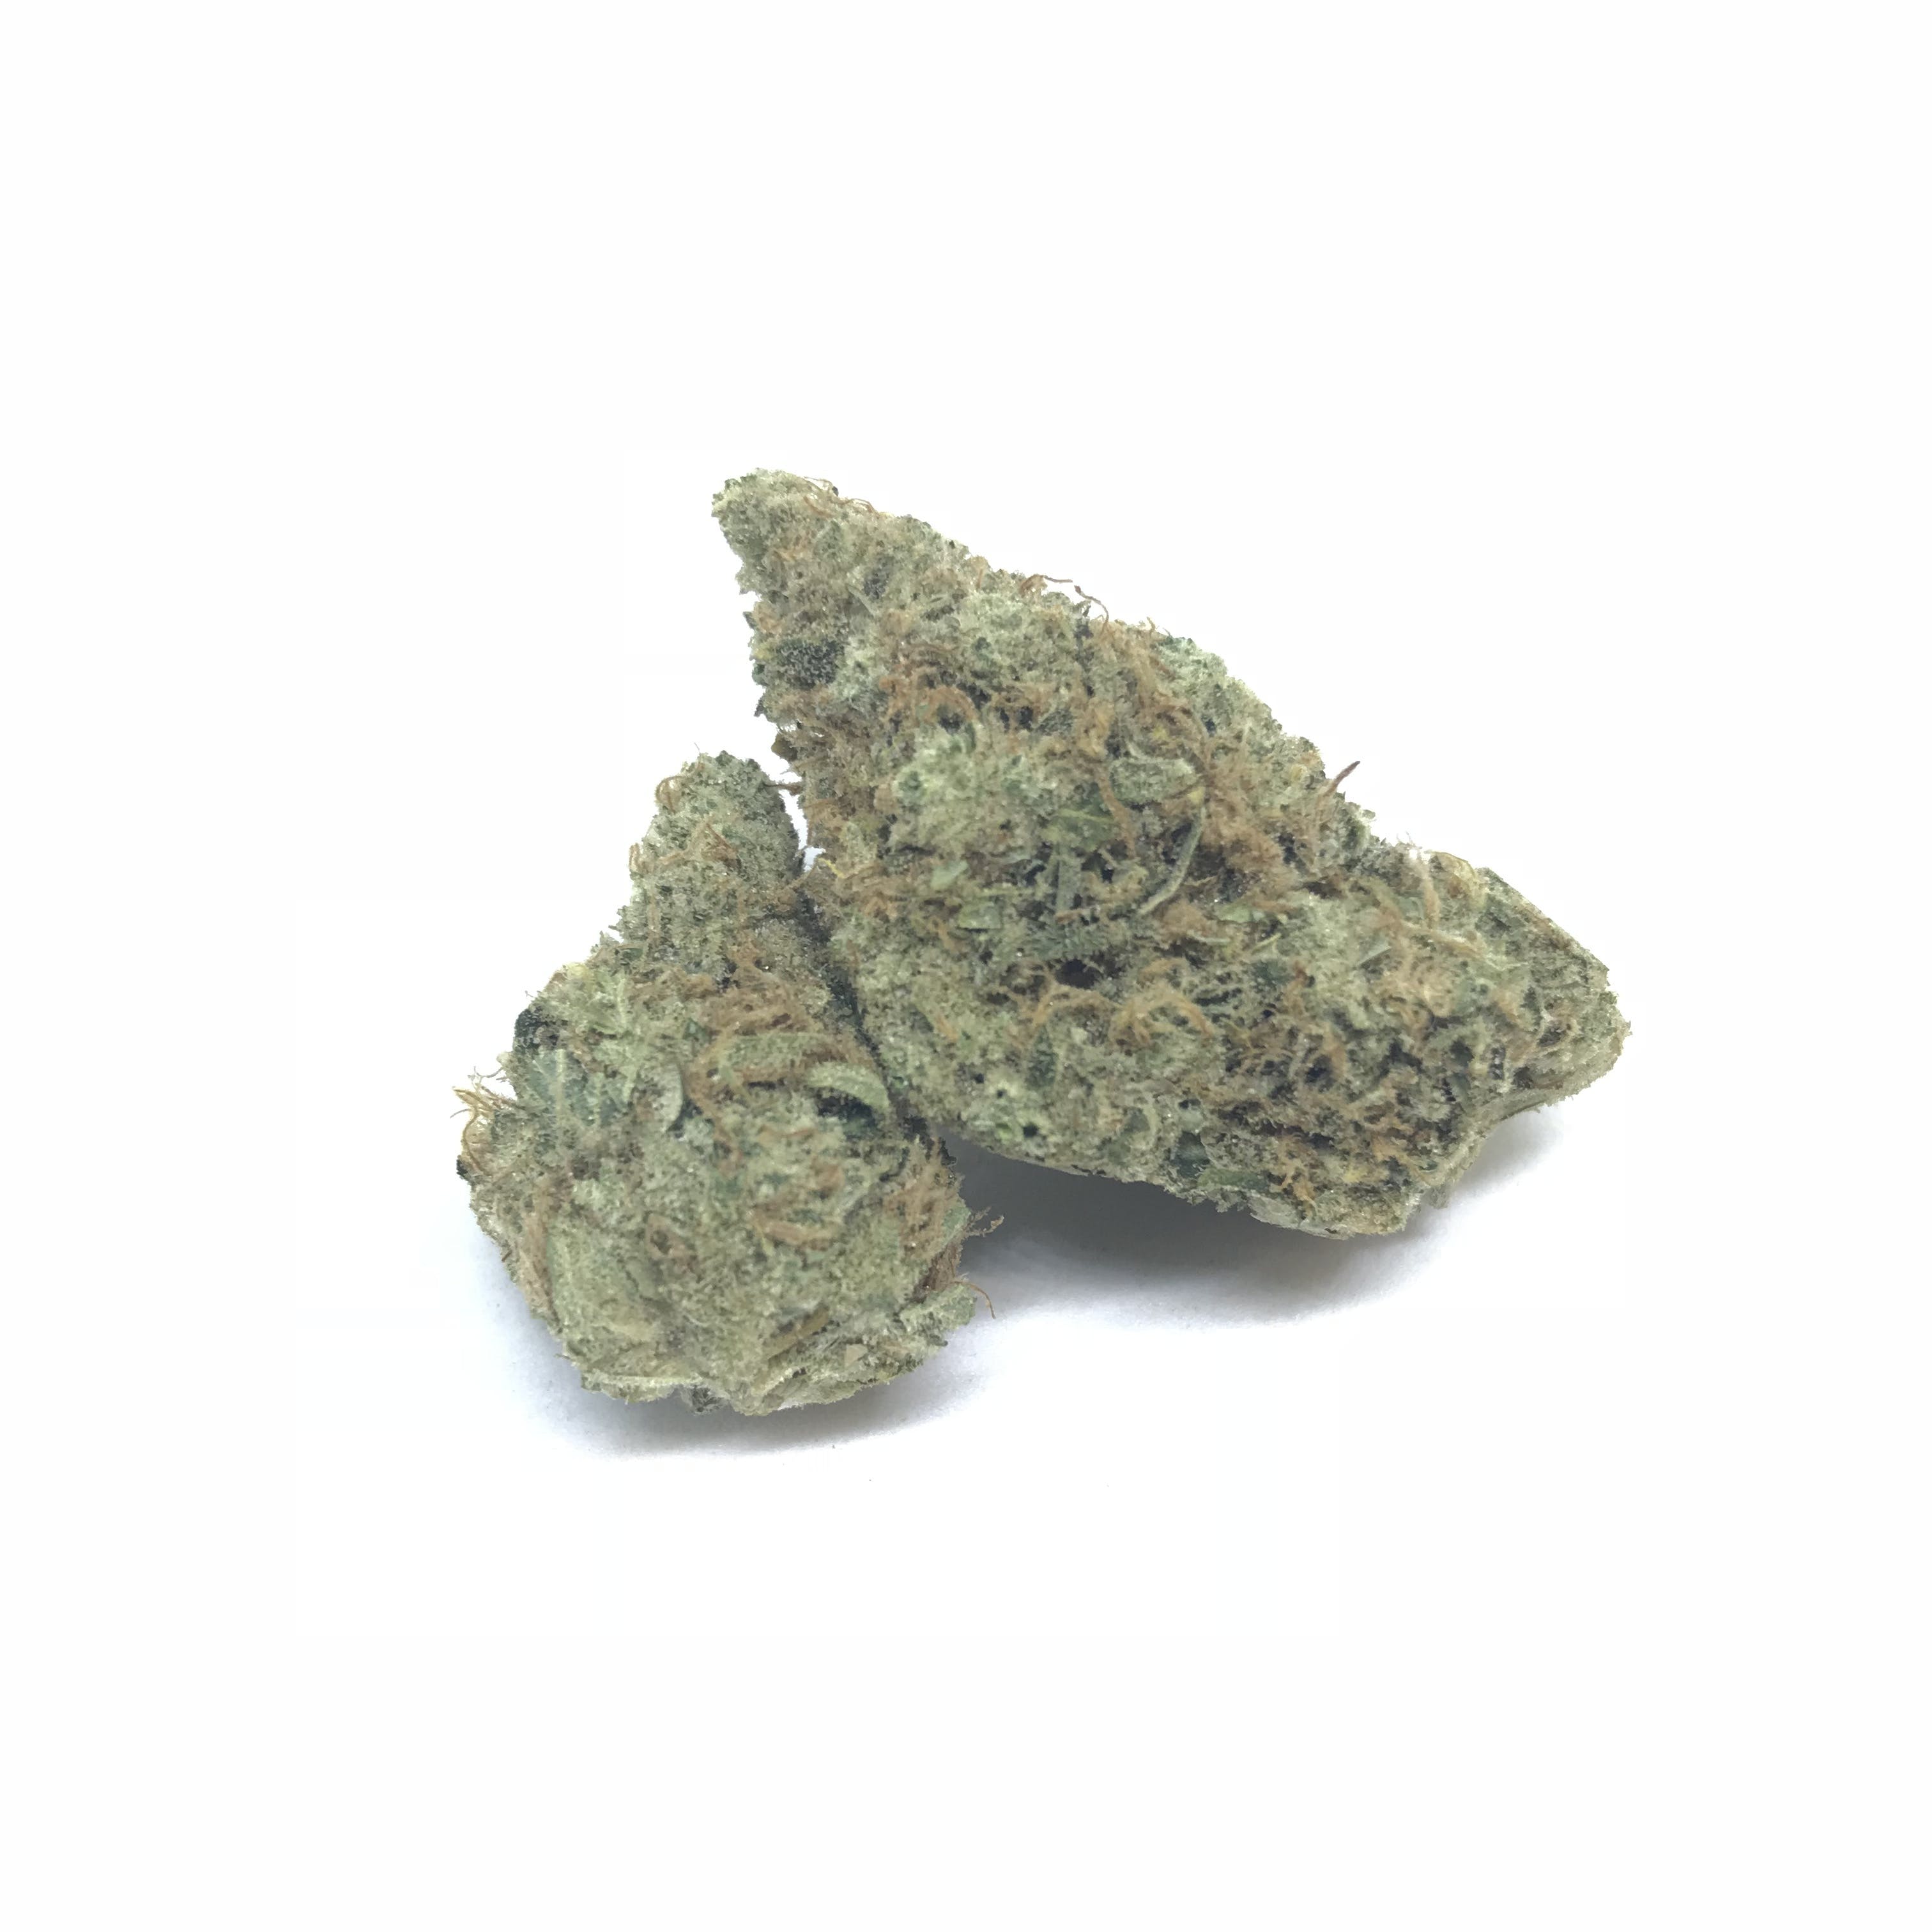 Stardawg - 22.8% THC (Fun Uncle)